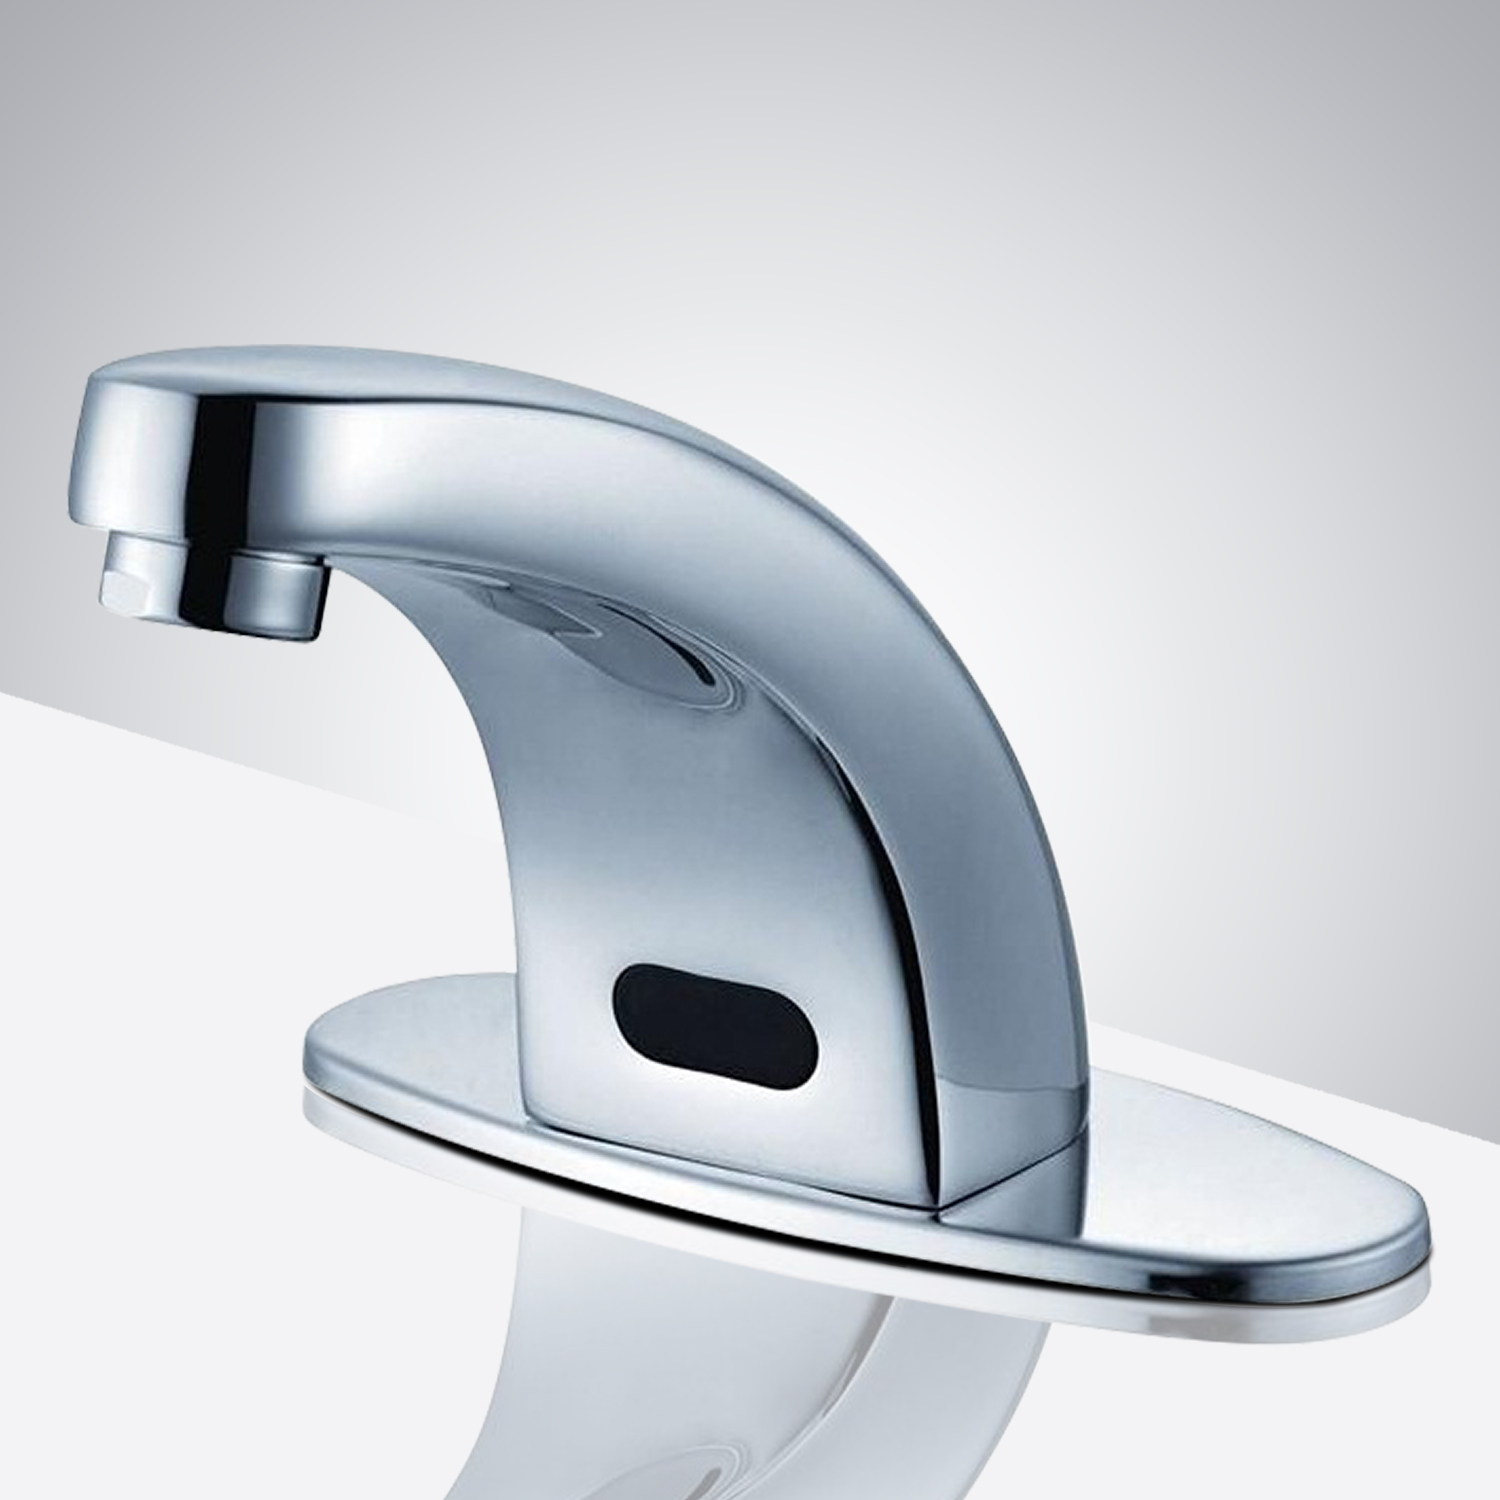 Buy Salina Commercial Automatic Touchless Sink Faucet At BathSelect